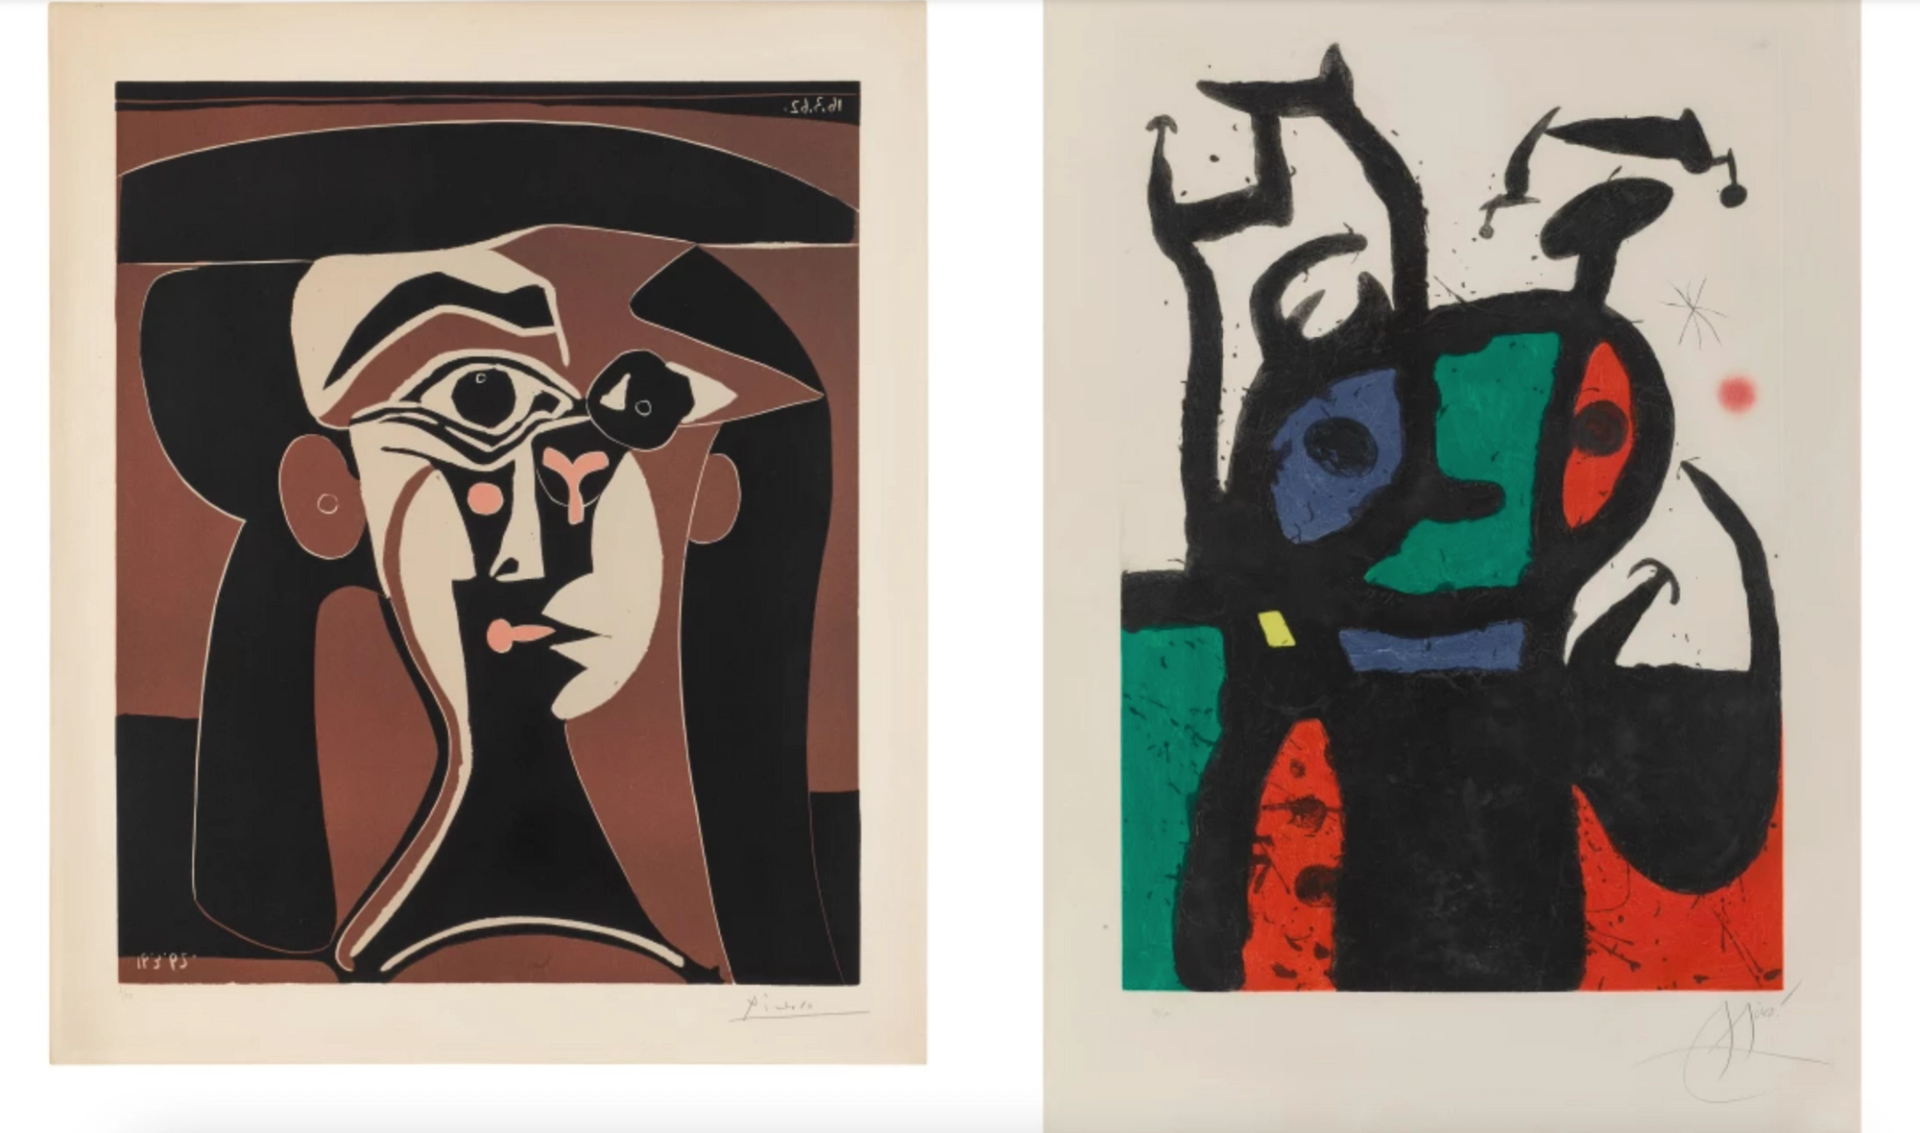 An image of the prints Jacqueline au Chapeau Noir by Picasso on the left and Le Matador by Miró on the right.